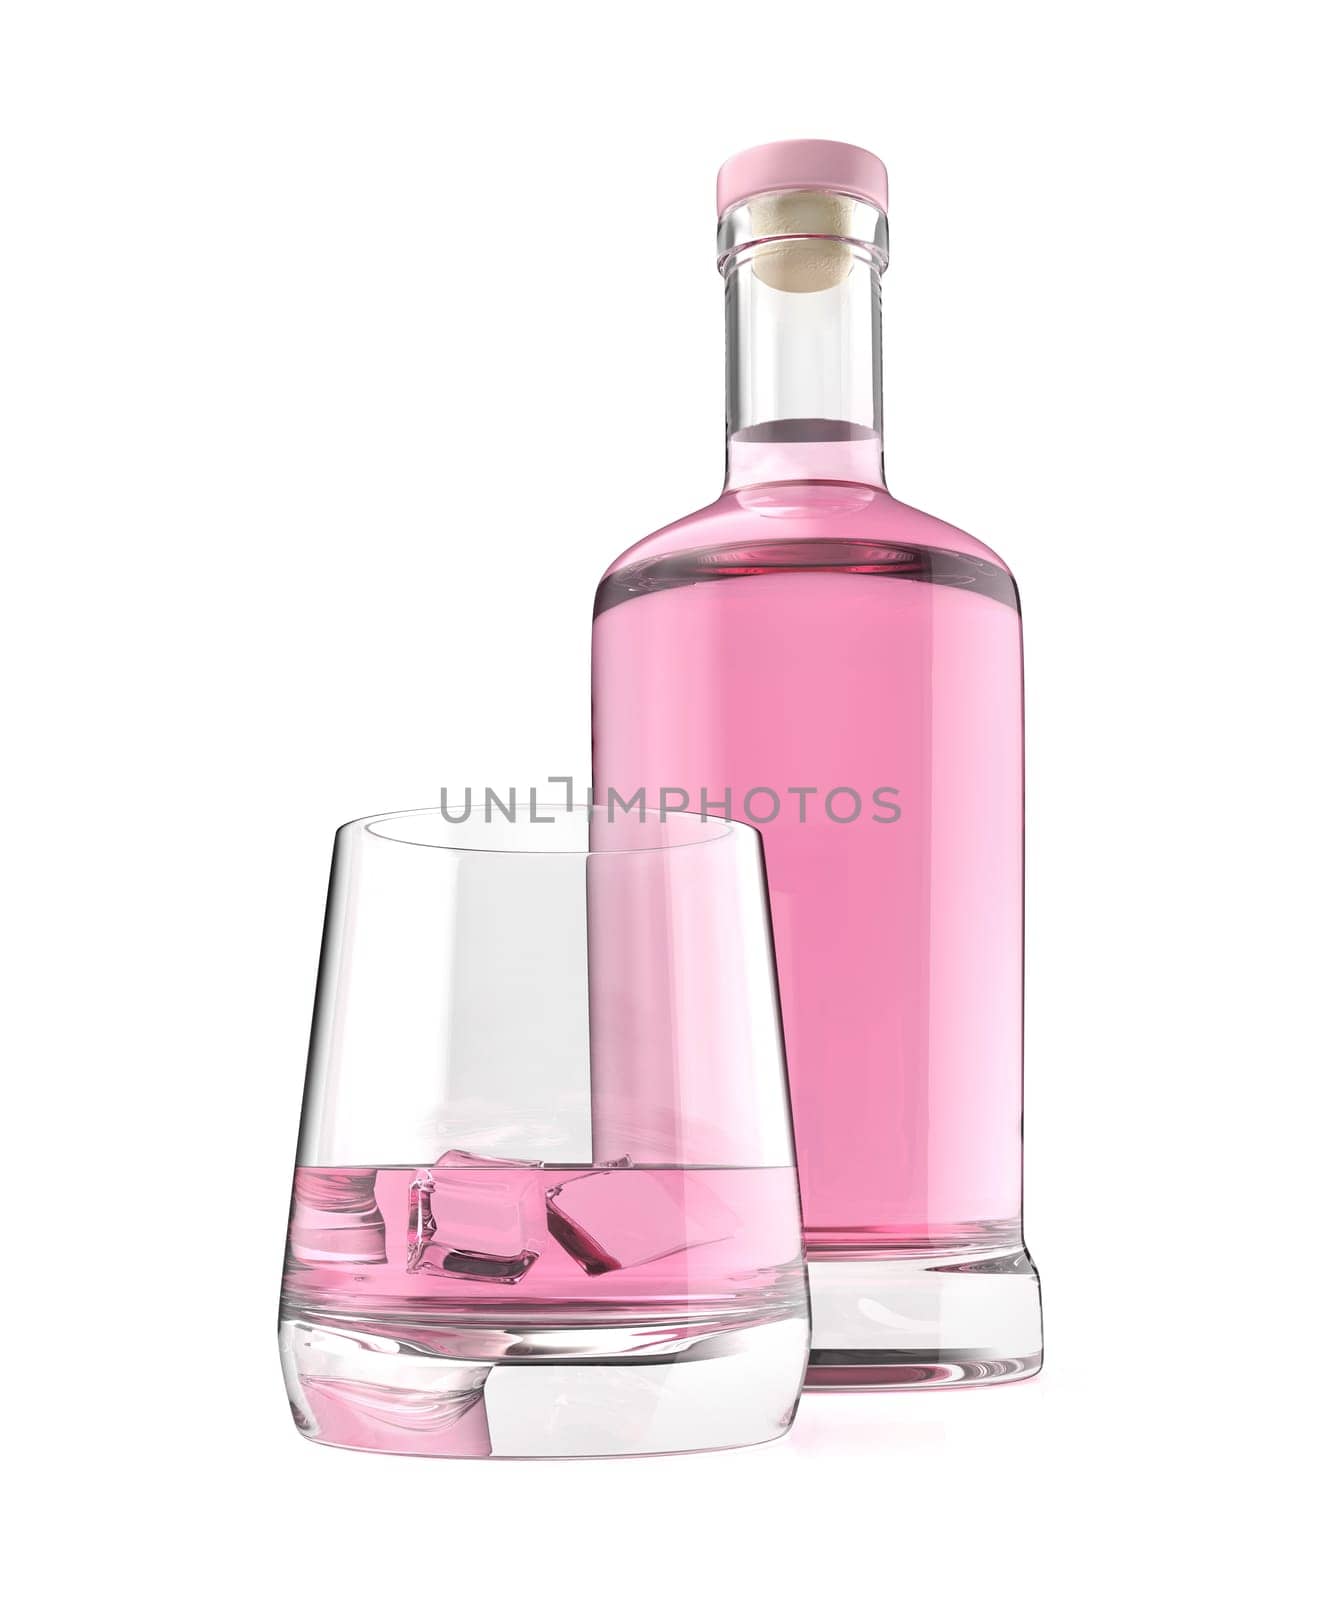 Bottle and a glass of pink gin or vodka by magraphics